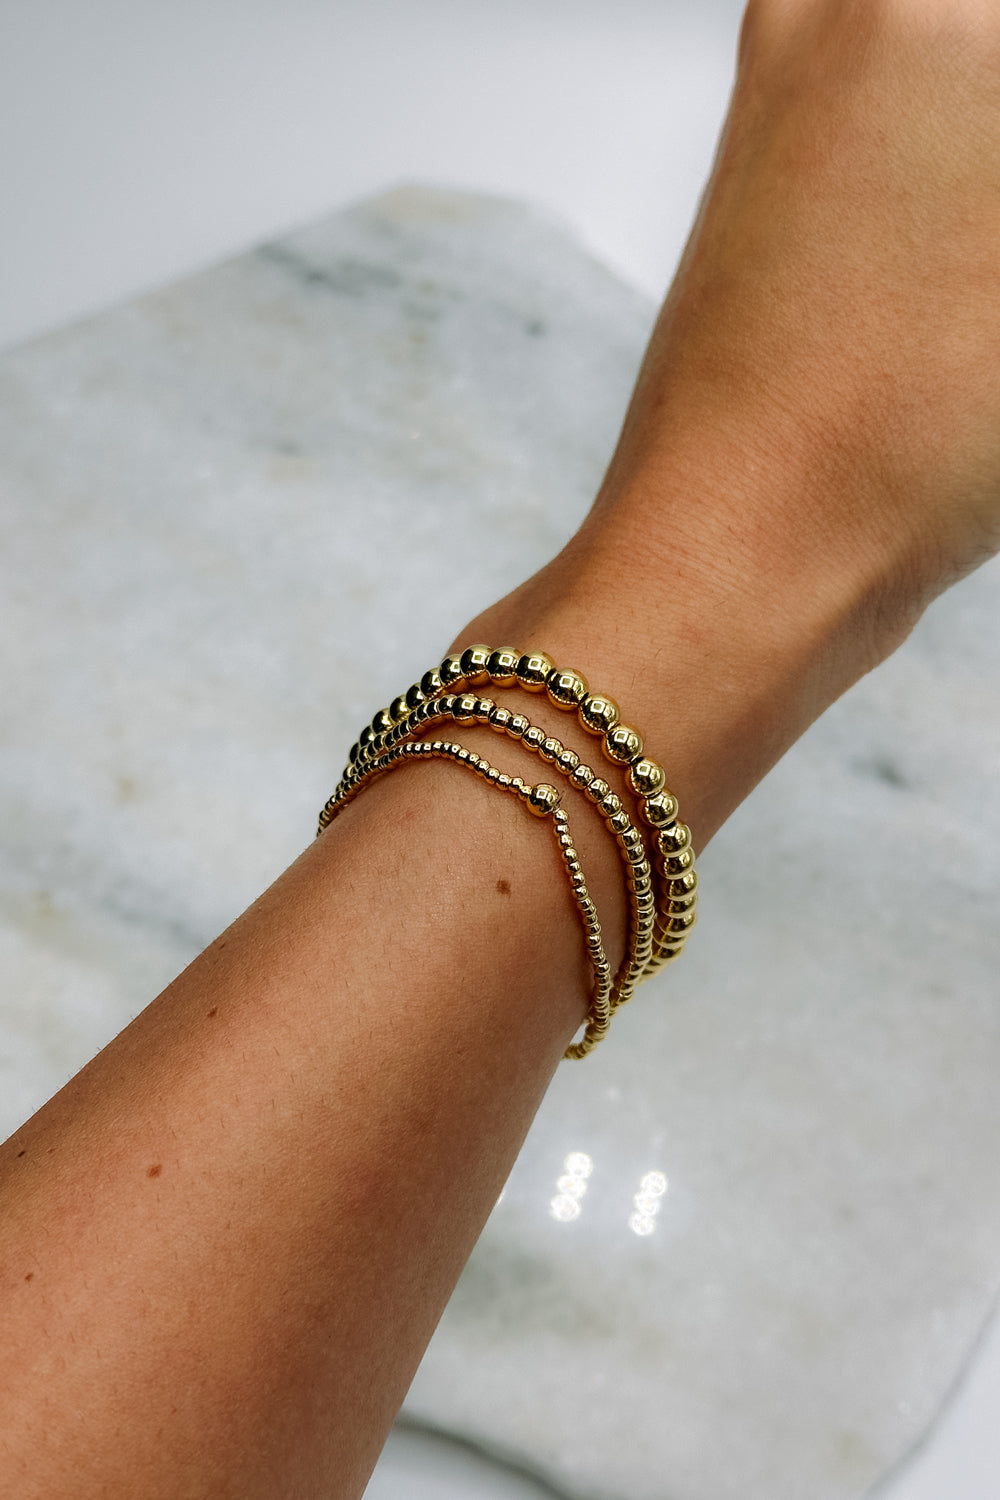 Image shows Aubrey Gold 4mm Beaded Water Resistant Bracelet worn on model's wrist with two other bracelets.